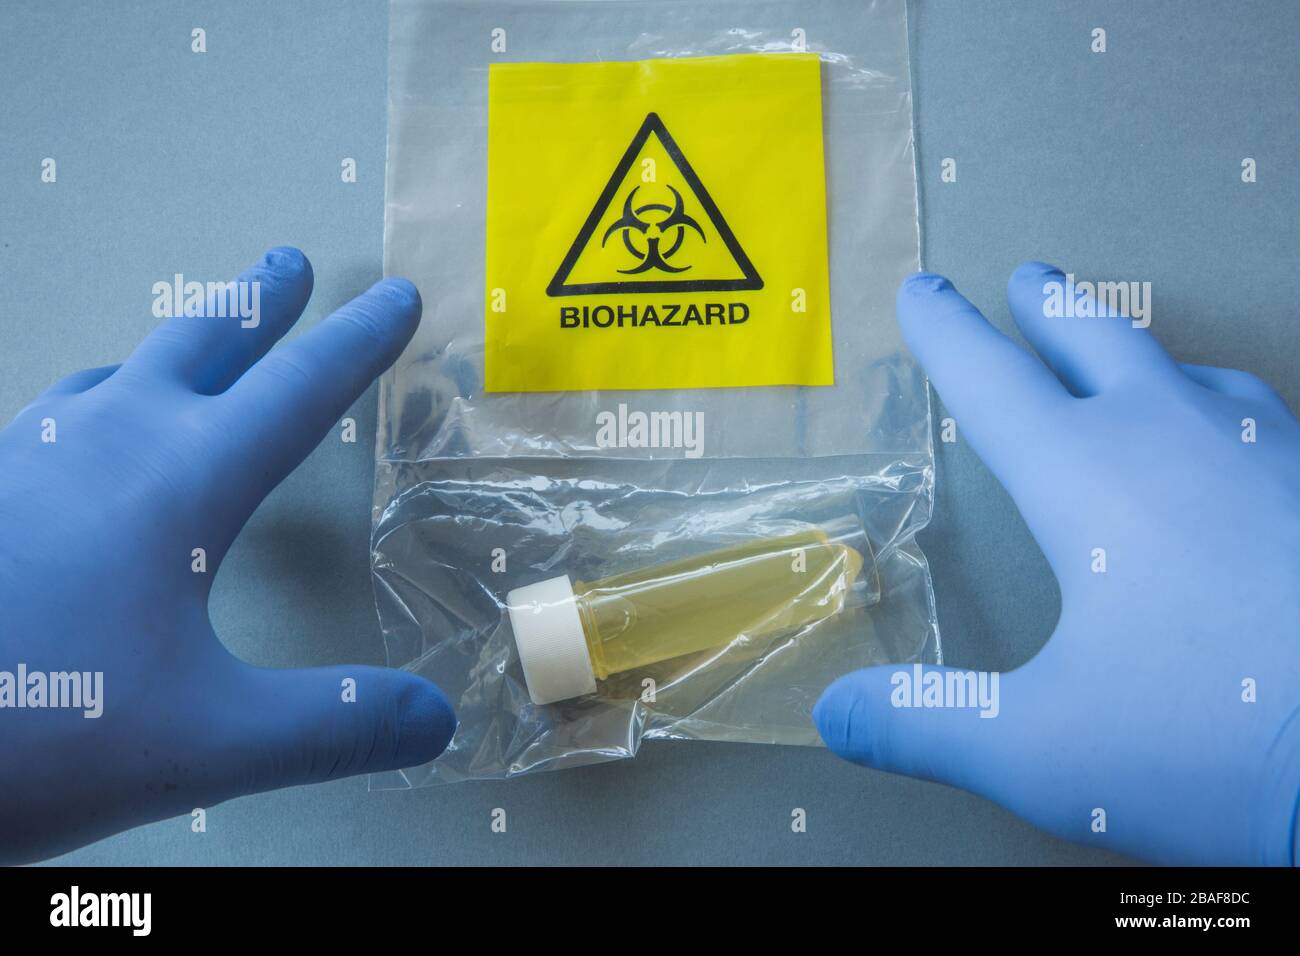 A point of view image of a pair of hands in blue protective gloves working with a Biohazard virus such as Coronavirus in a Laboratory Stock Photo